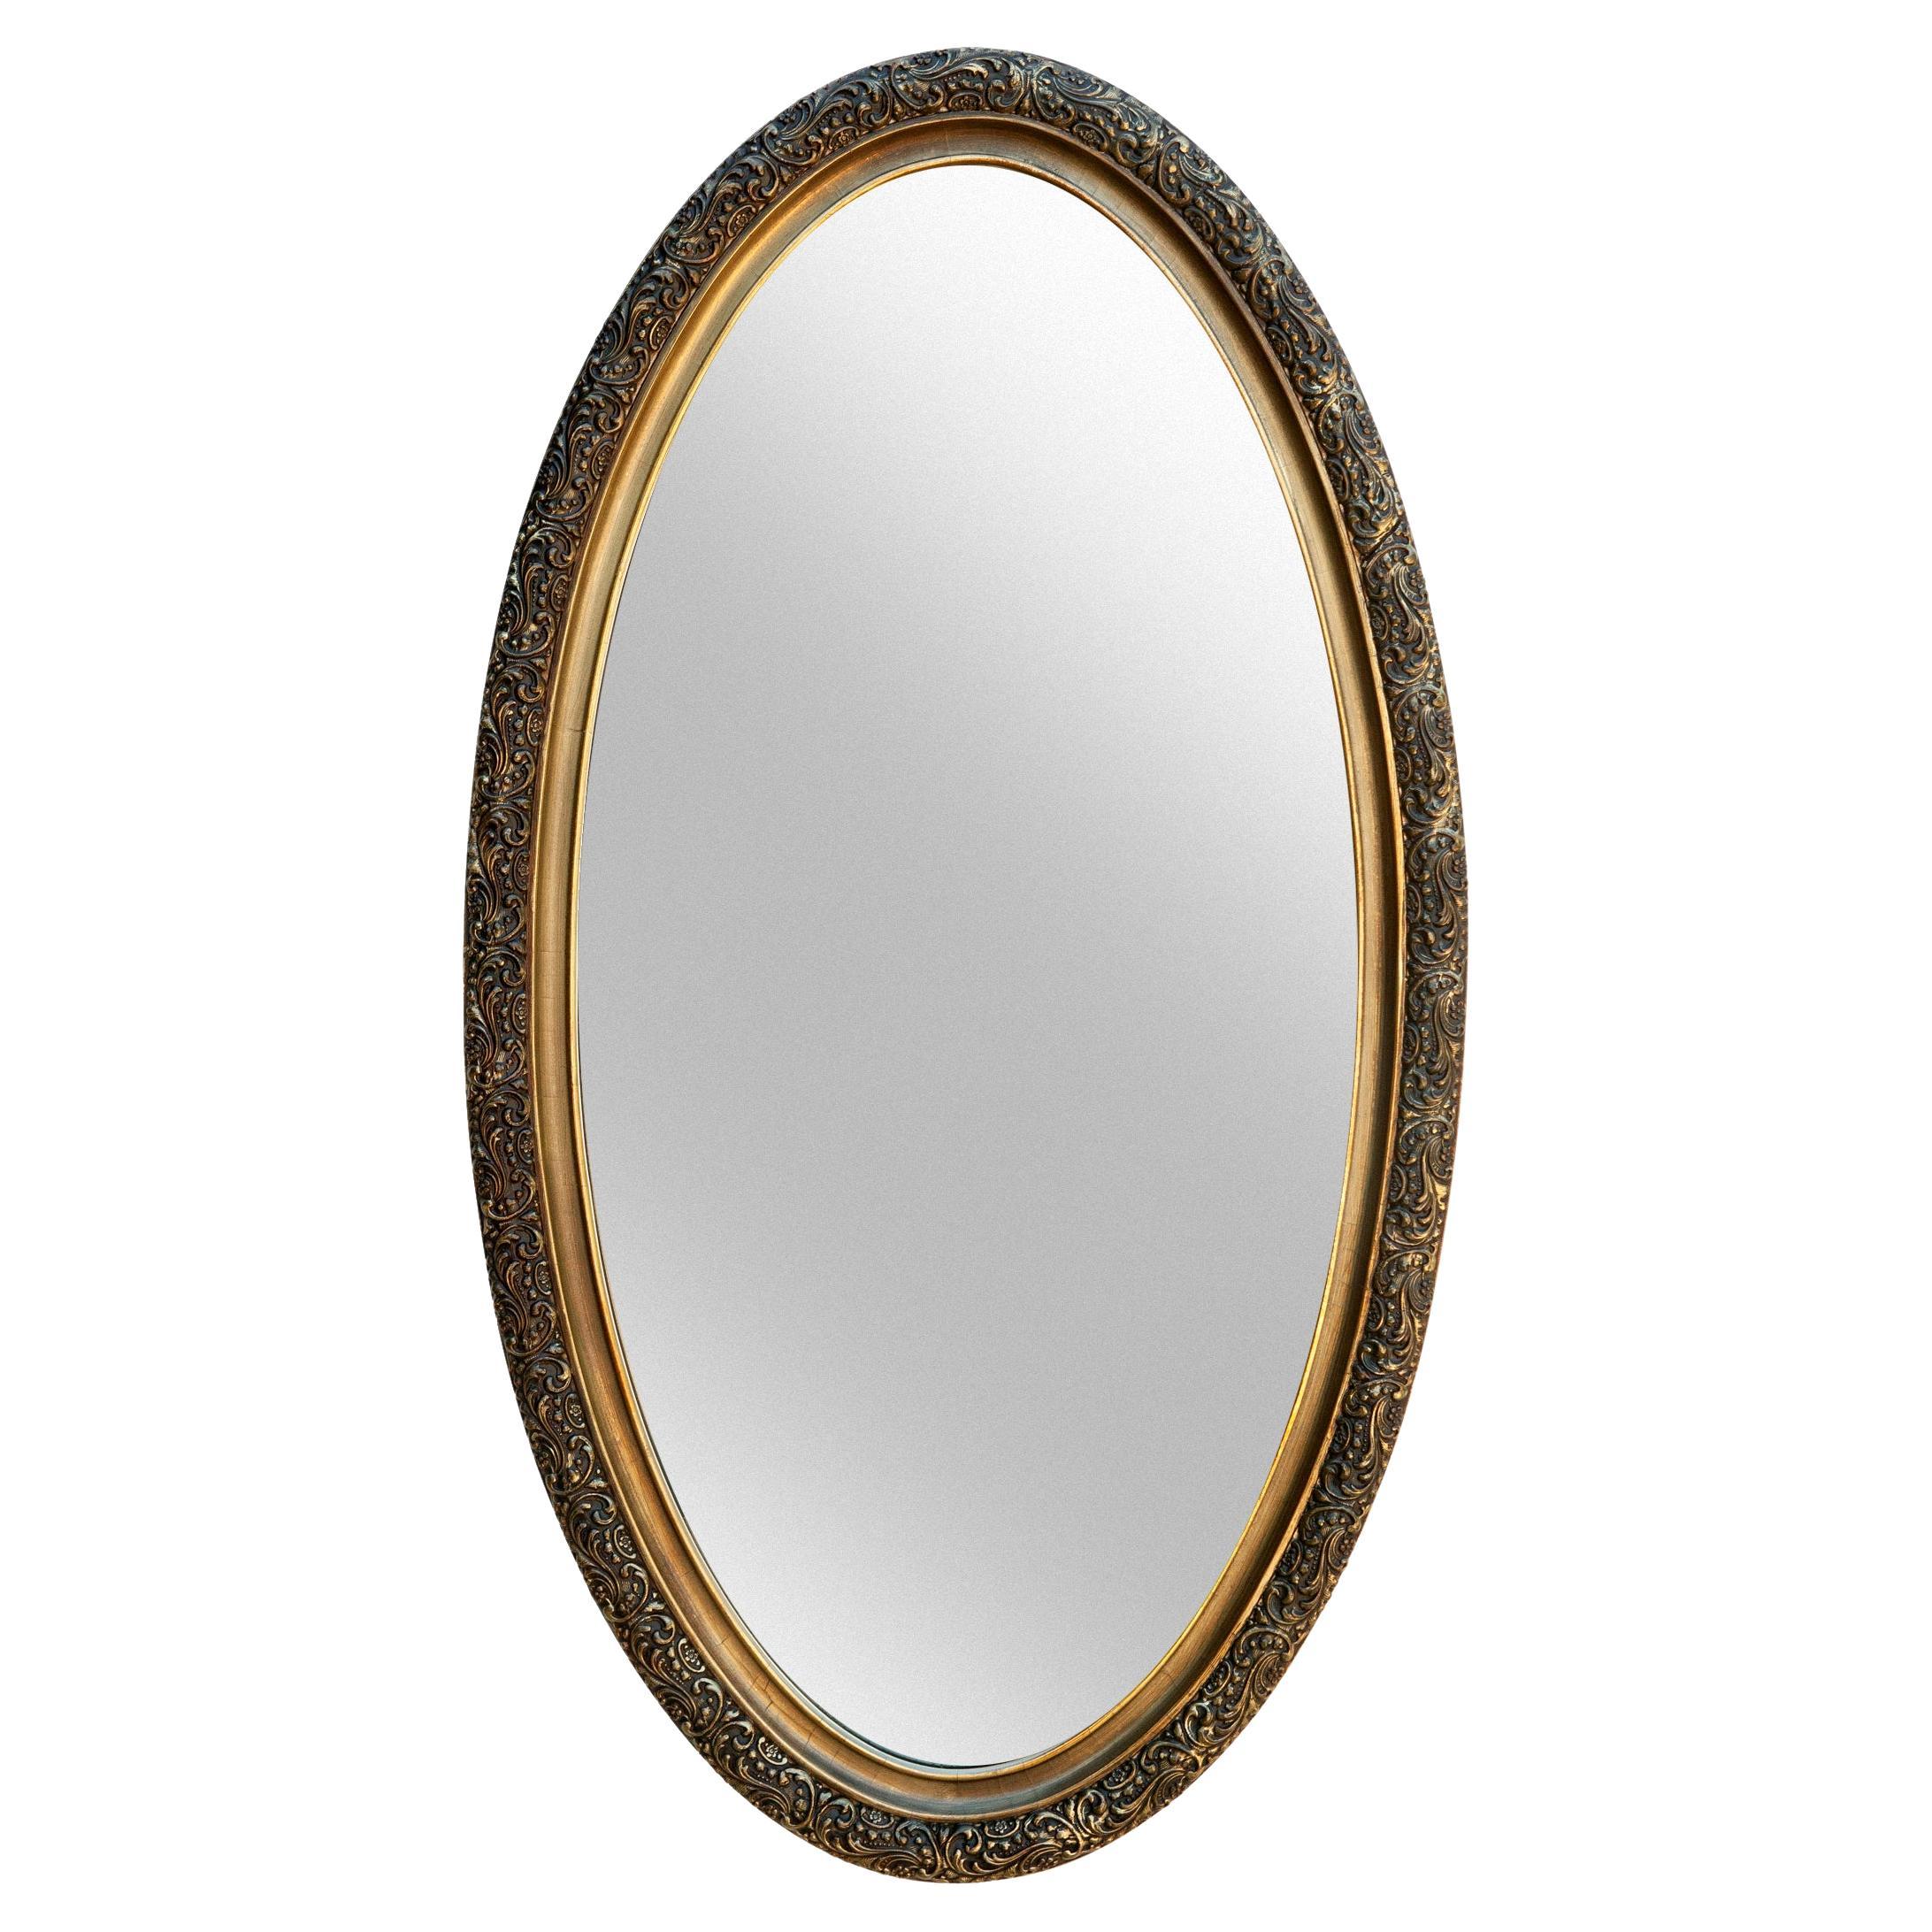 Hand painted Elongated Oval Mirror in Burnt Umber & Gold For Sale